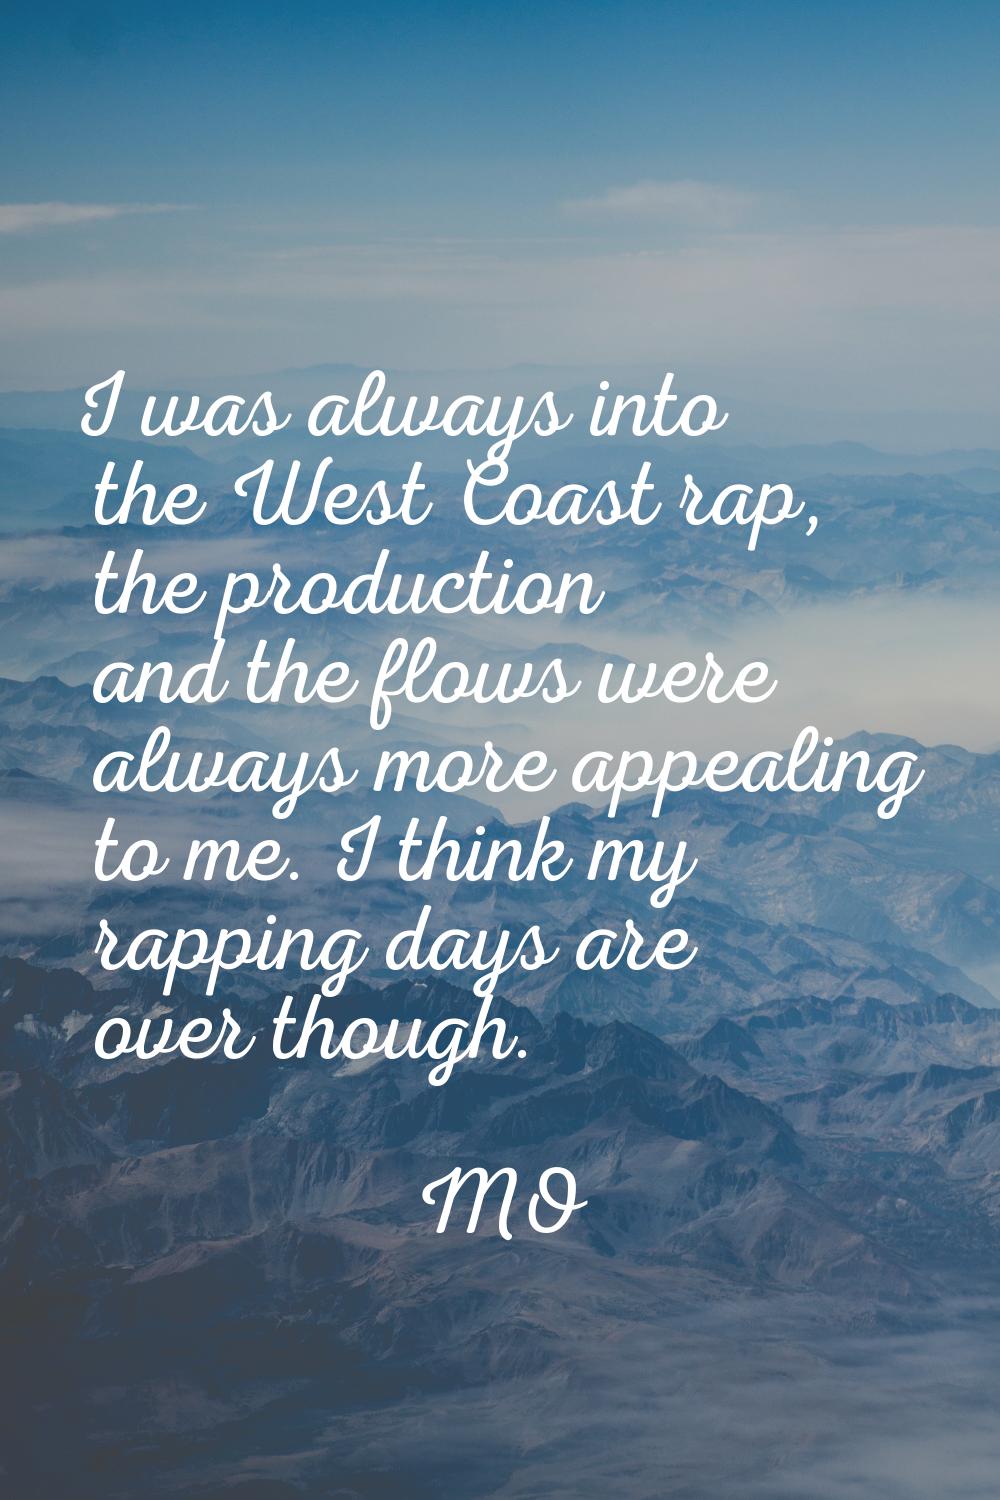 I was always into the West Coast rap, the production and the flows were always more appealing to me